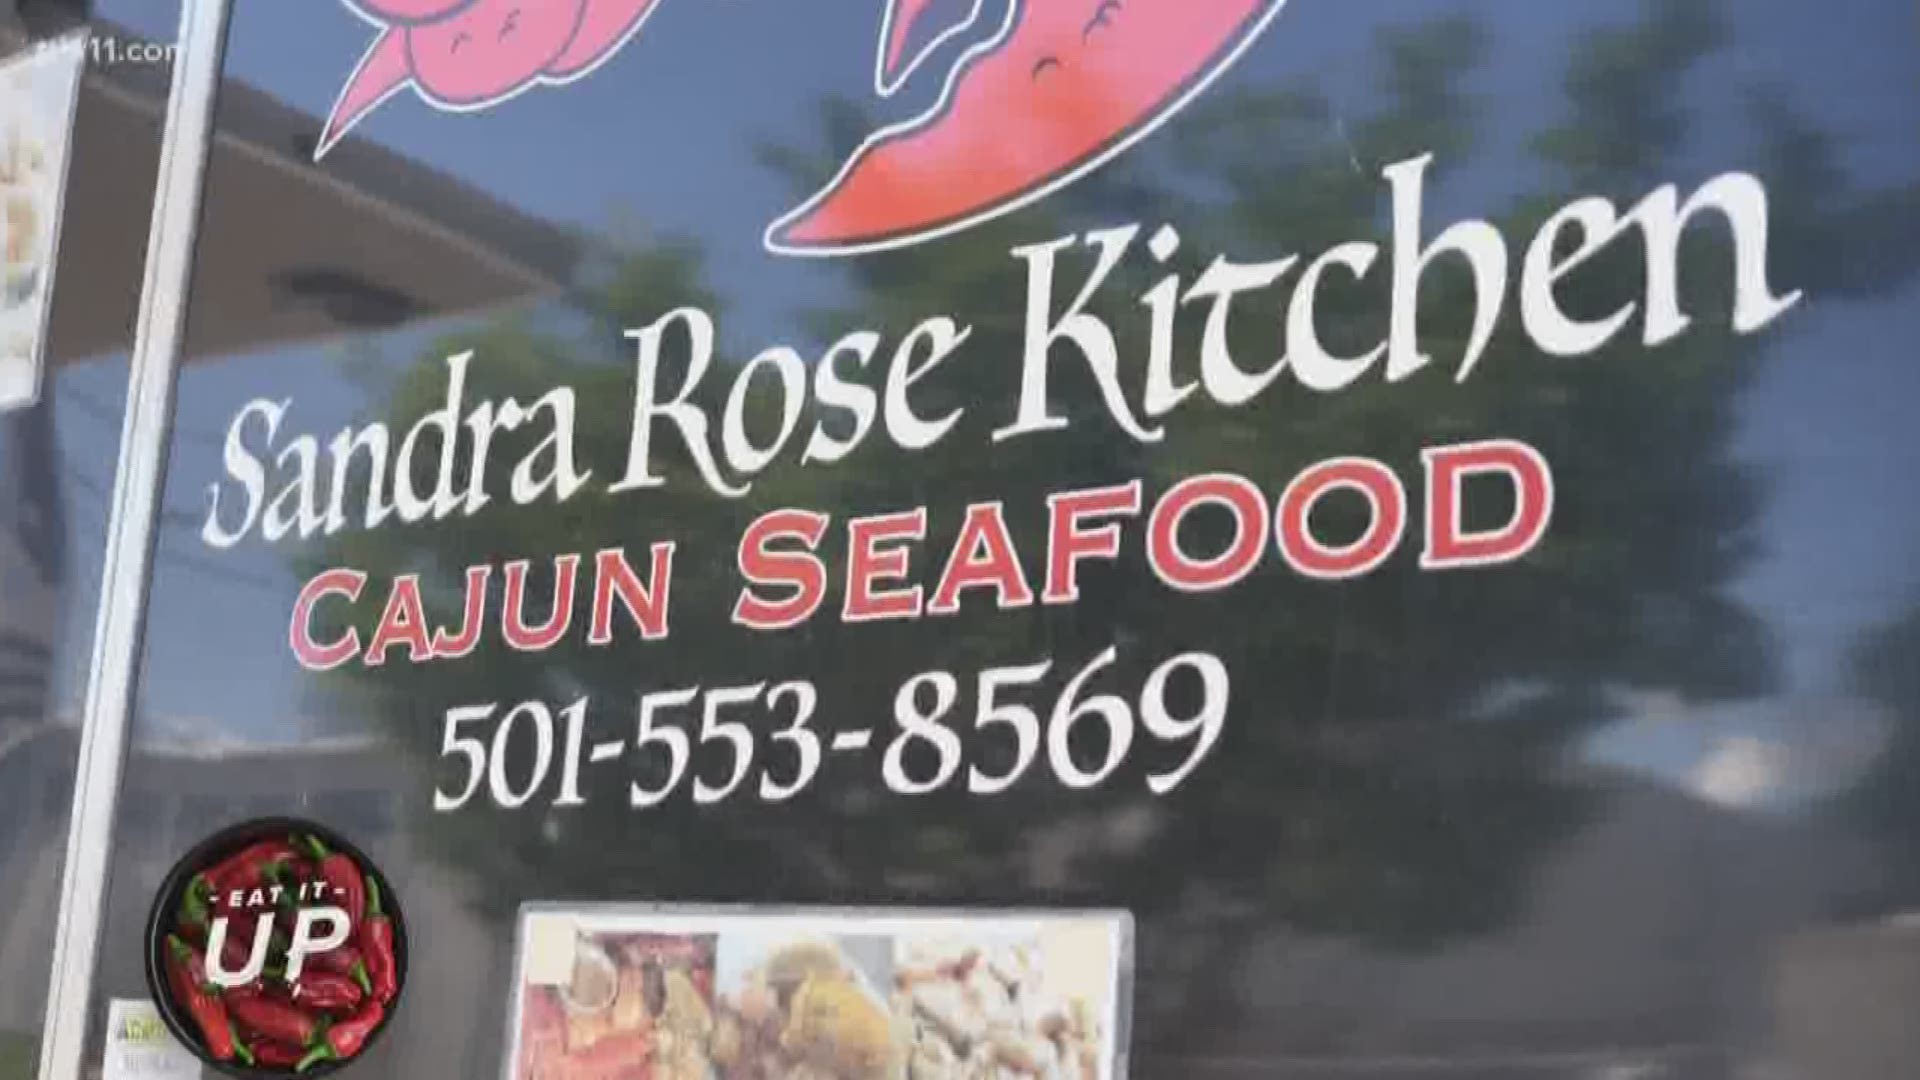 This week eat it up goes to Sandra Rose Kitchen as we continue our month long eat it up food truck edition. They specialize in Cajun seafood that's homemade and full of delicious ingredients and spices. They also specialize in quick pick up orders for those who are busy and on the go.